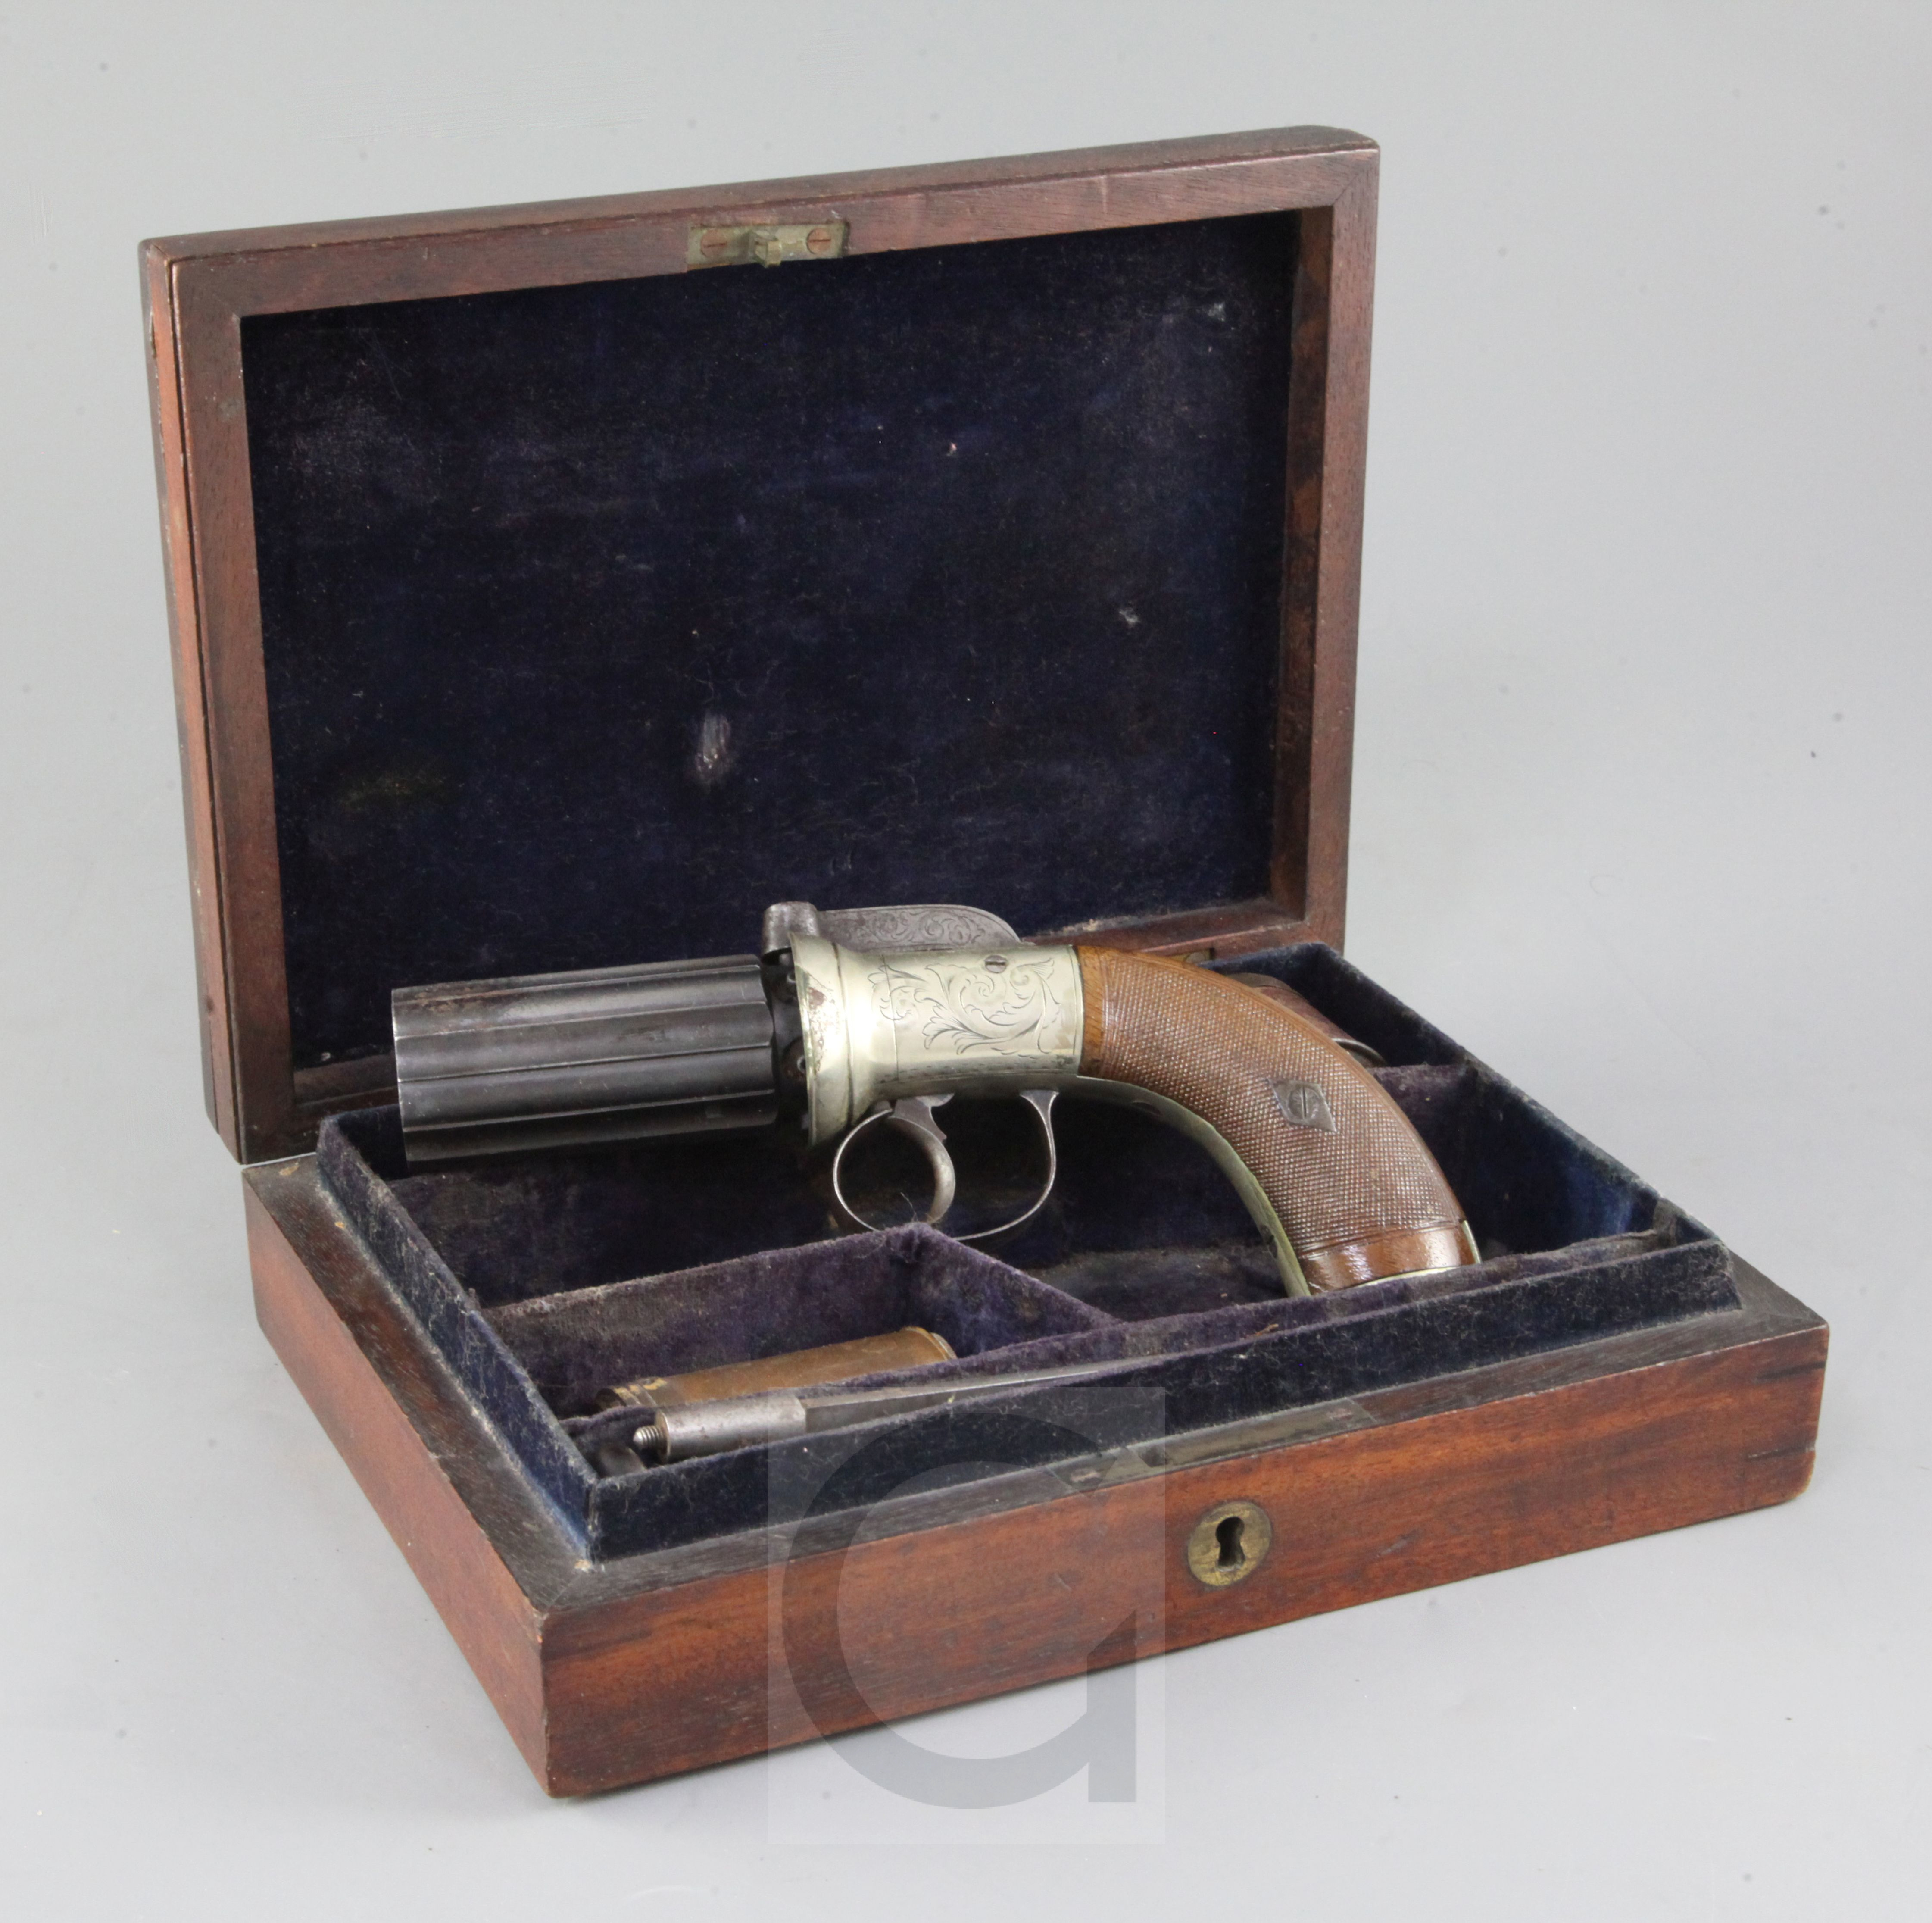 A cased percussion pepperbox six barrelled revolver, with German silver frame, by Dooley, Liverpool,